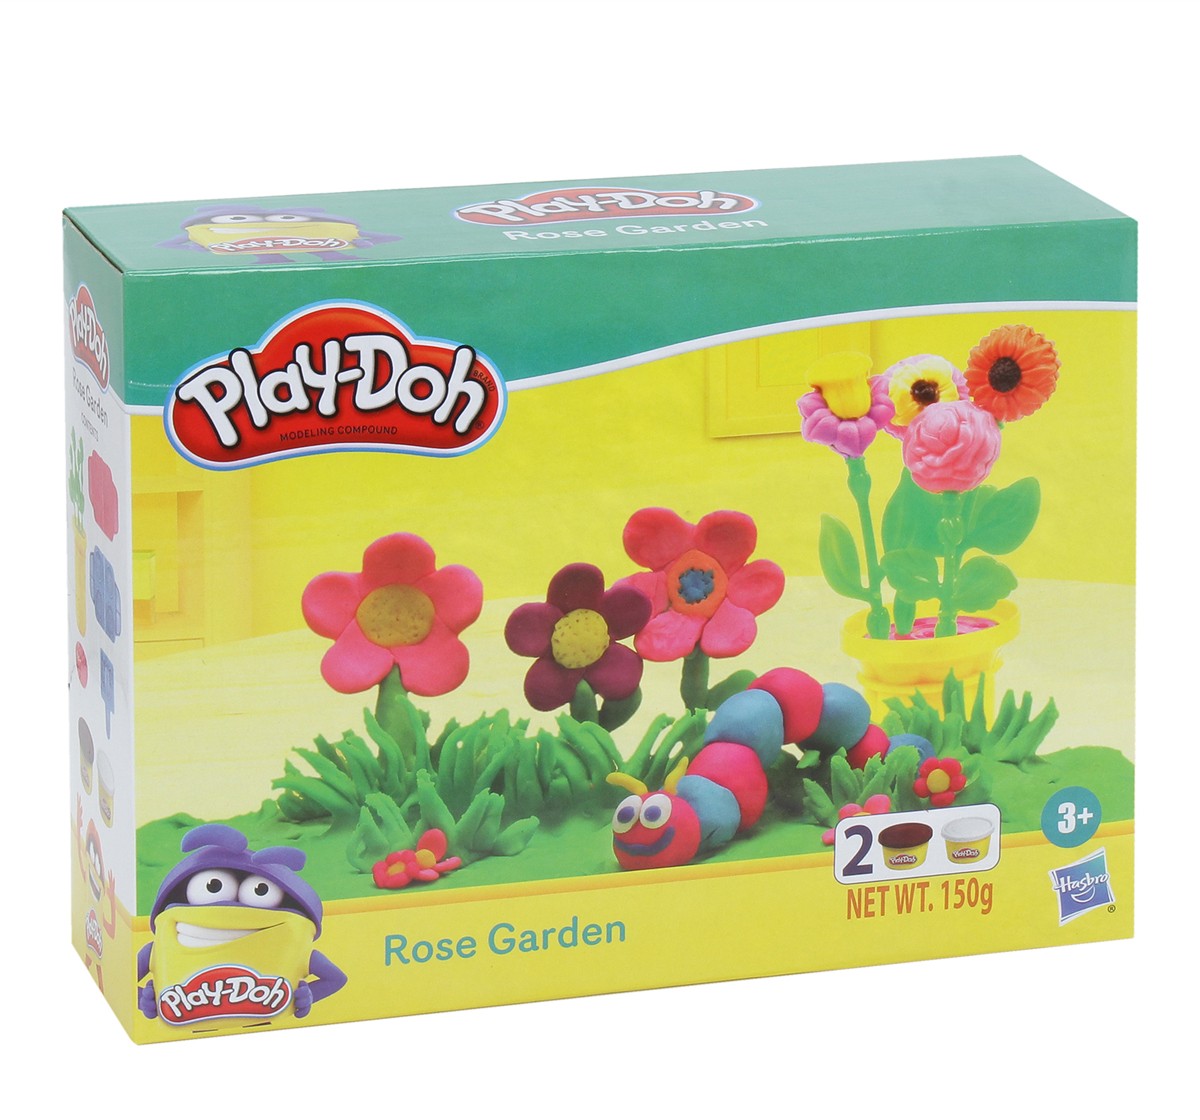 Play-Doh Rose Garden Playset for Kids 3 Years and Up with 2 Non-Toxic Play-Doh Colors Clay & Dough for Kids age 3Y+ 